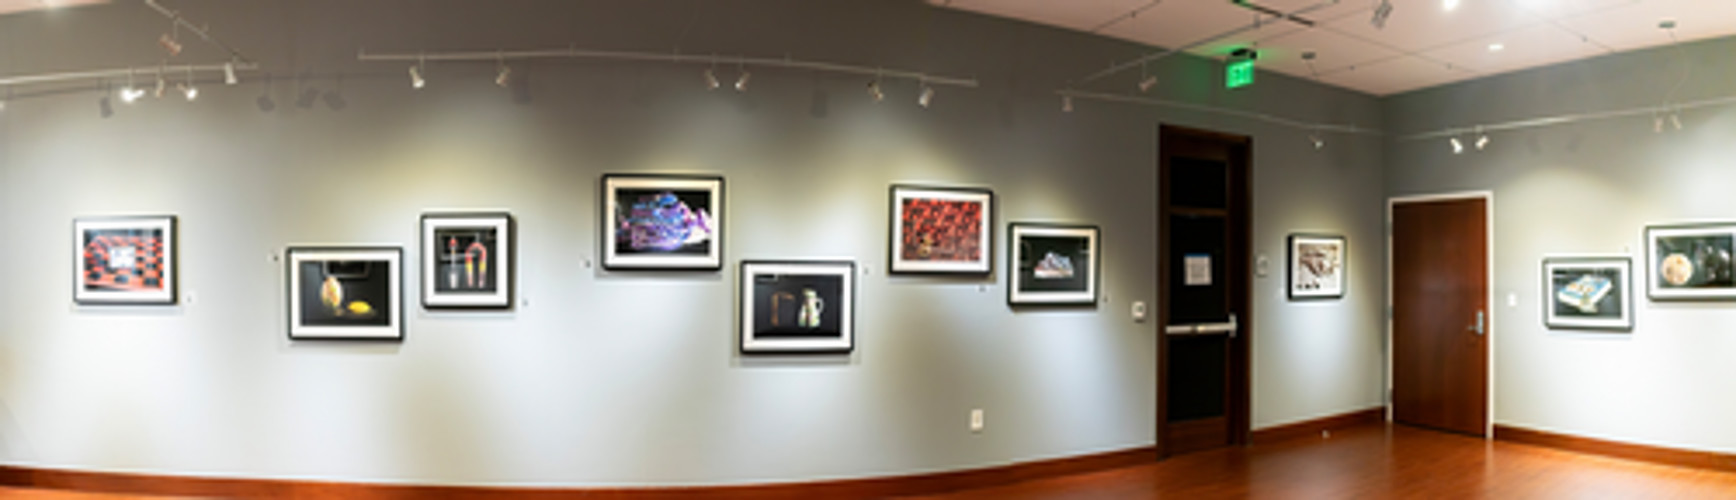 installation view with pictures of jane szbos pictures.  